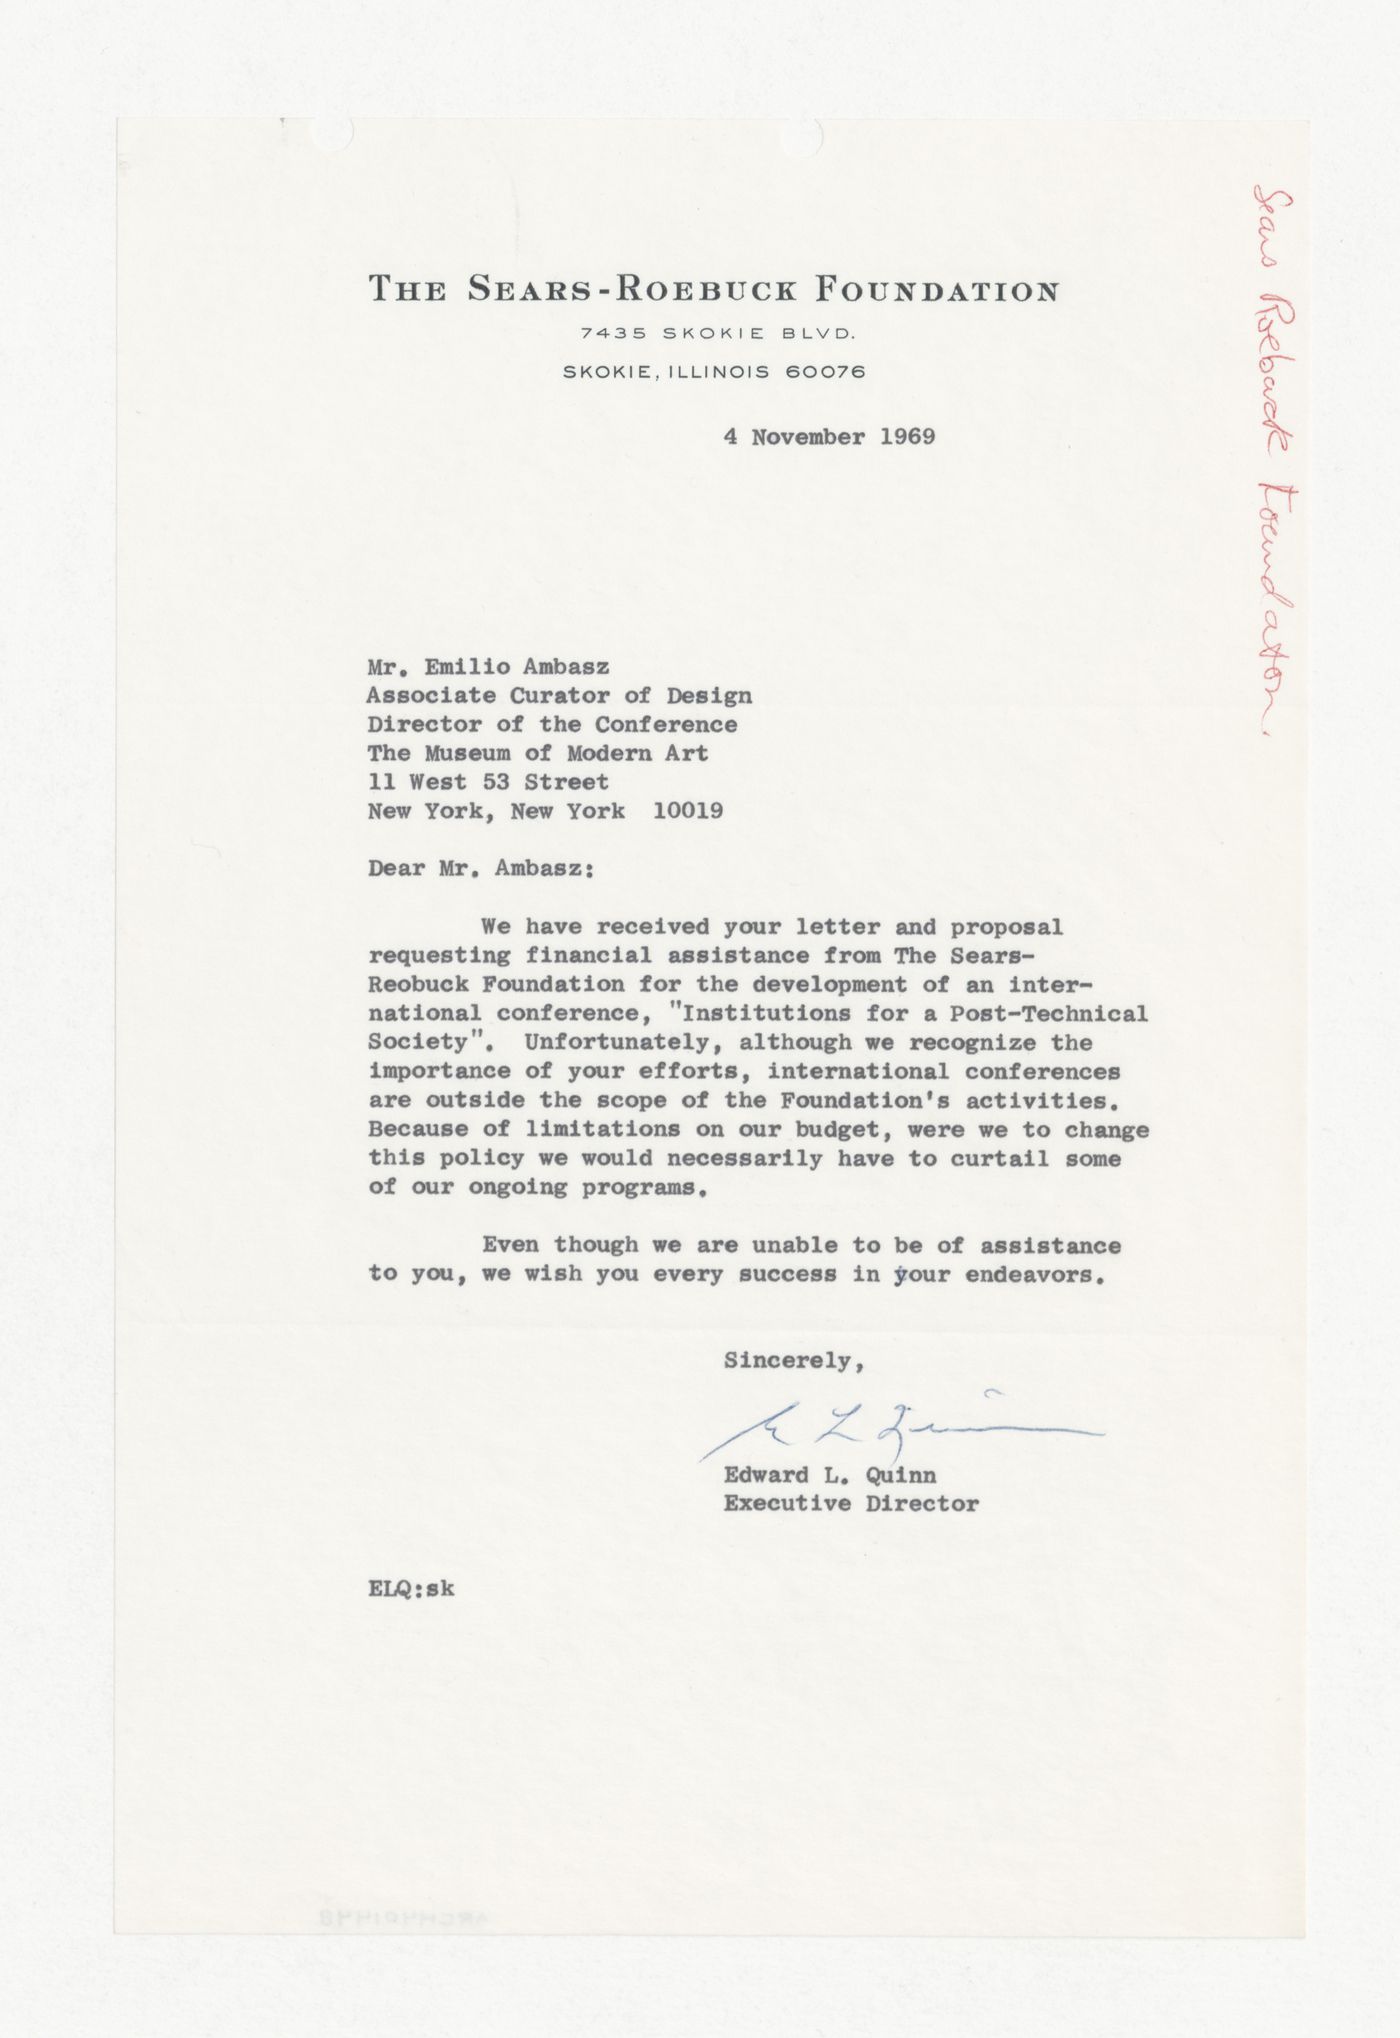 Letter from Edward L. Quinn to Emilio Ambasz responding to proposal for Institutions for a Post-Technological Society conference